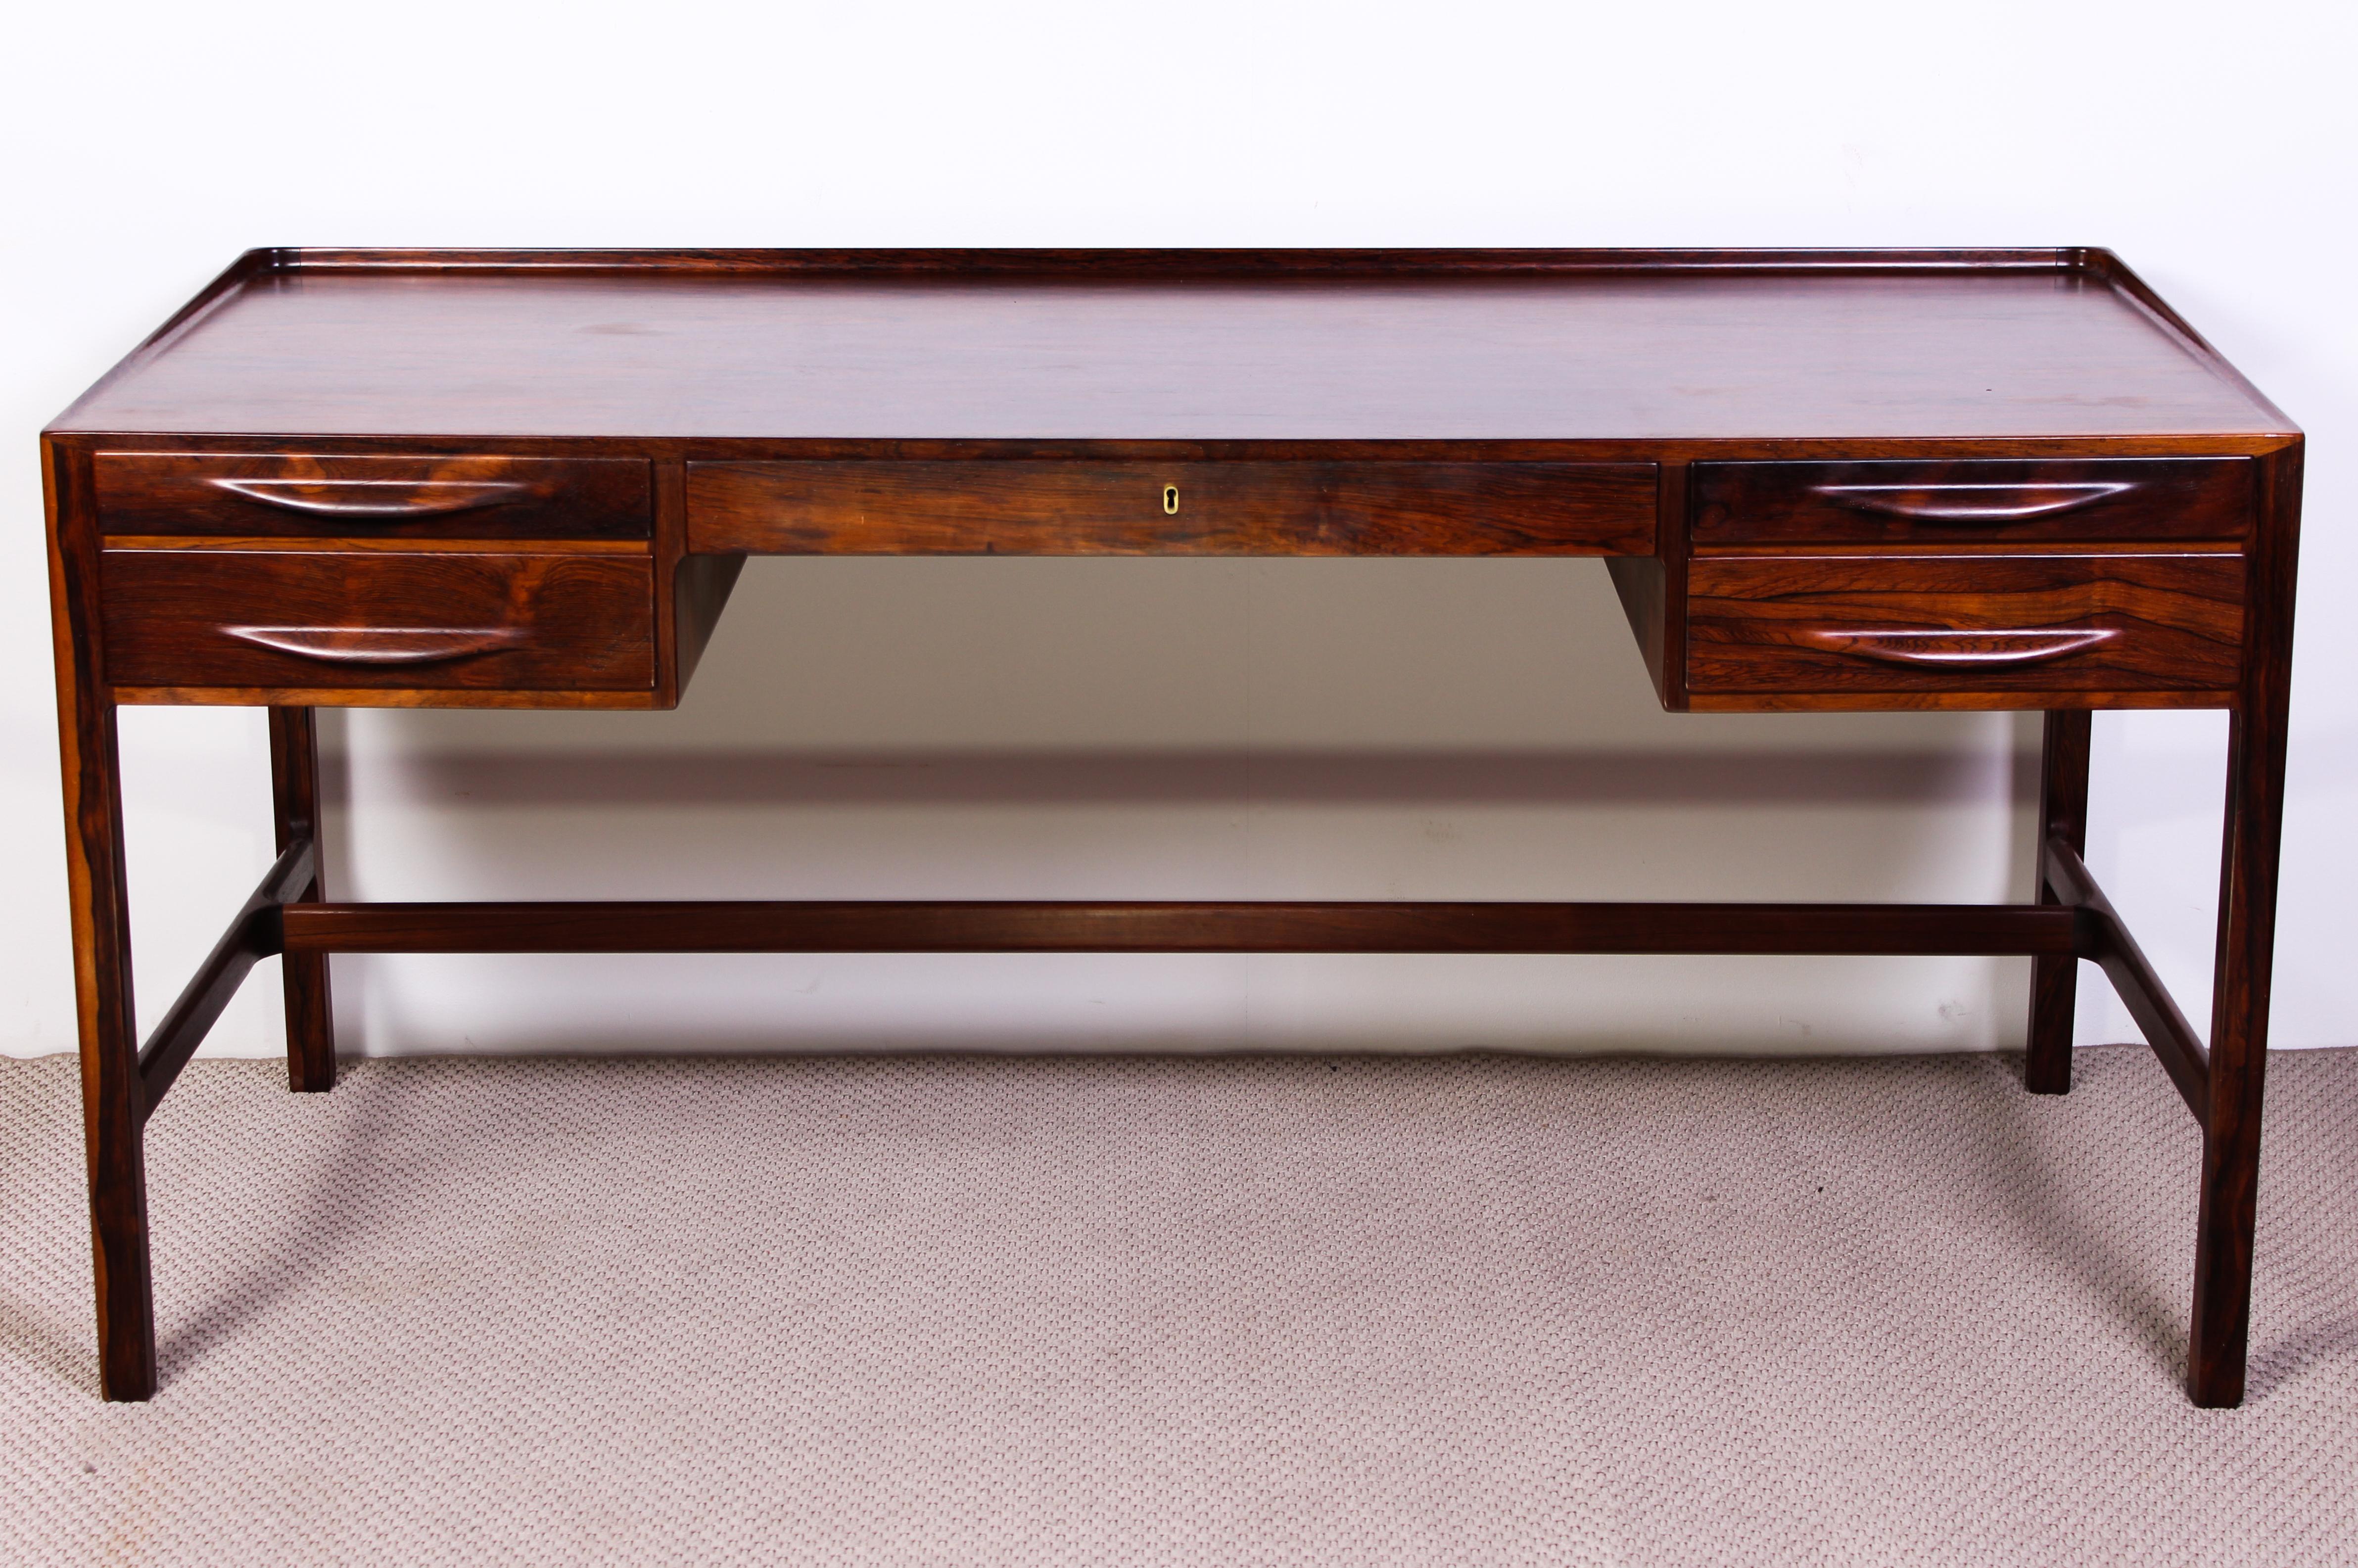 A very rare rosewood desk designed by Danish designer Kurt Østervig for Jason Møbler. The desk is made out of beautifully grained rosewood and has several nice details such as raised edge around the top and sculptured handles. The design looks great